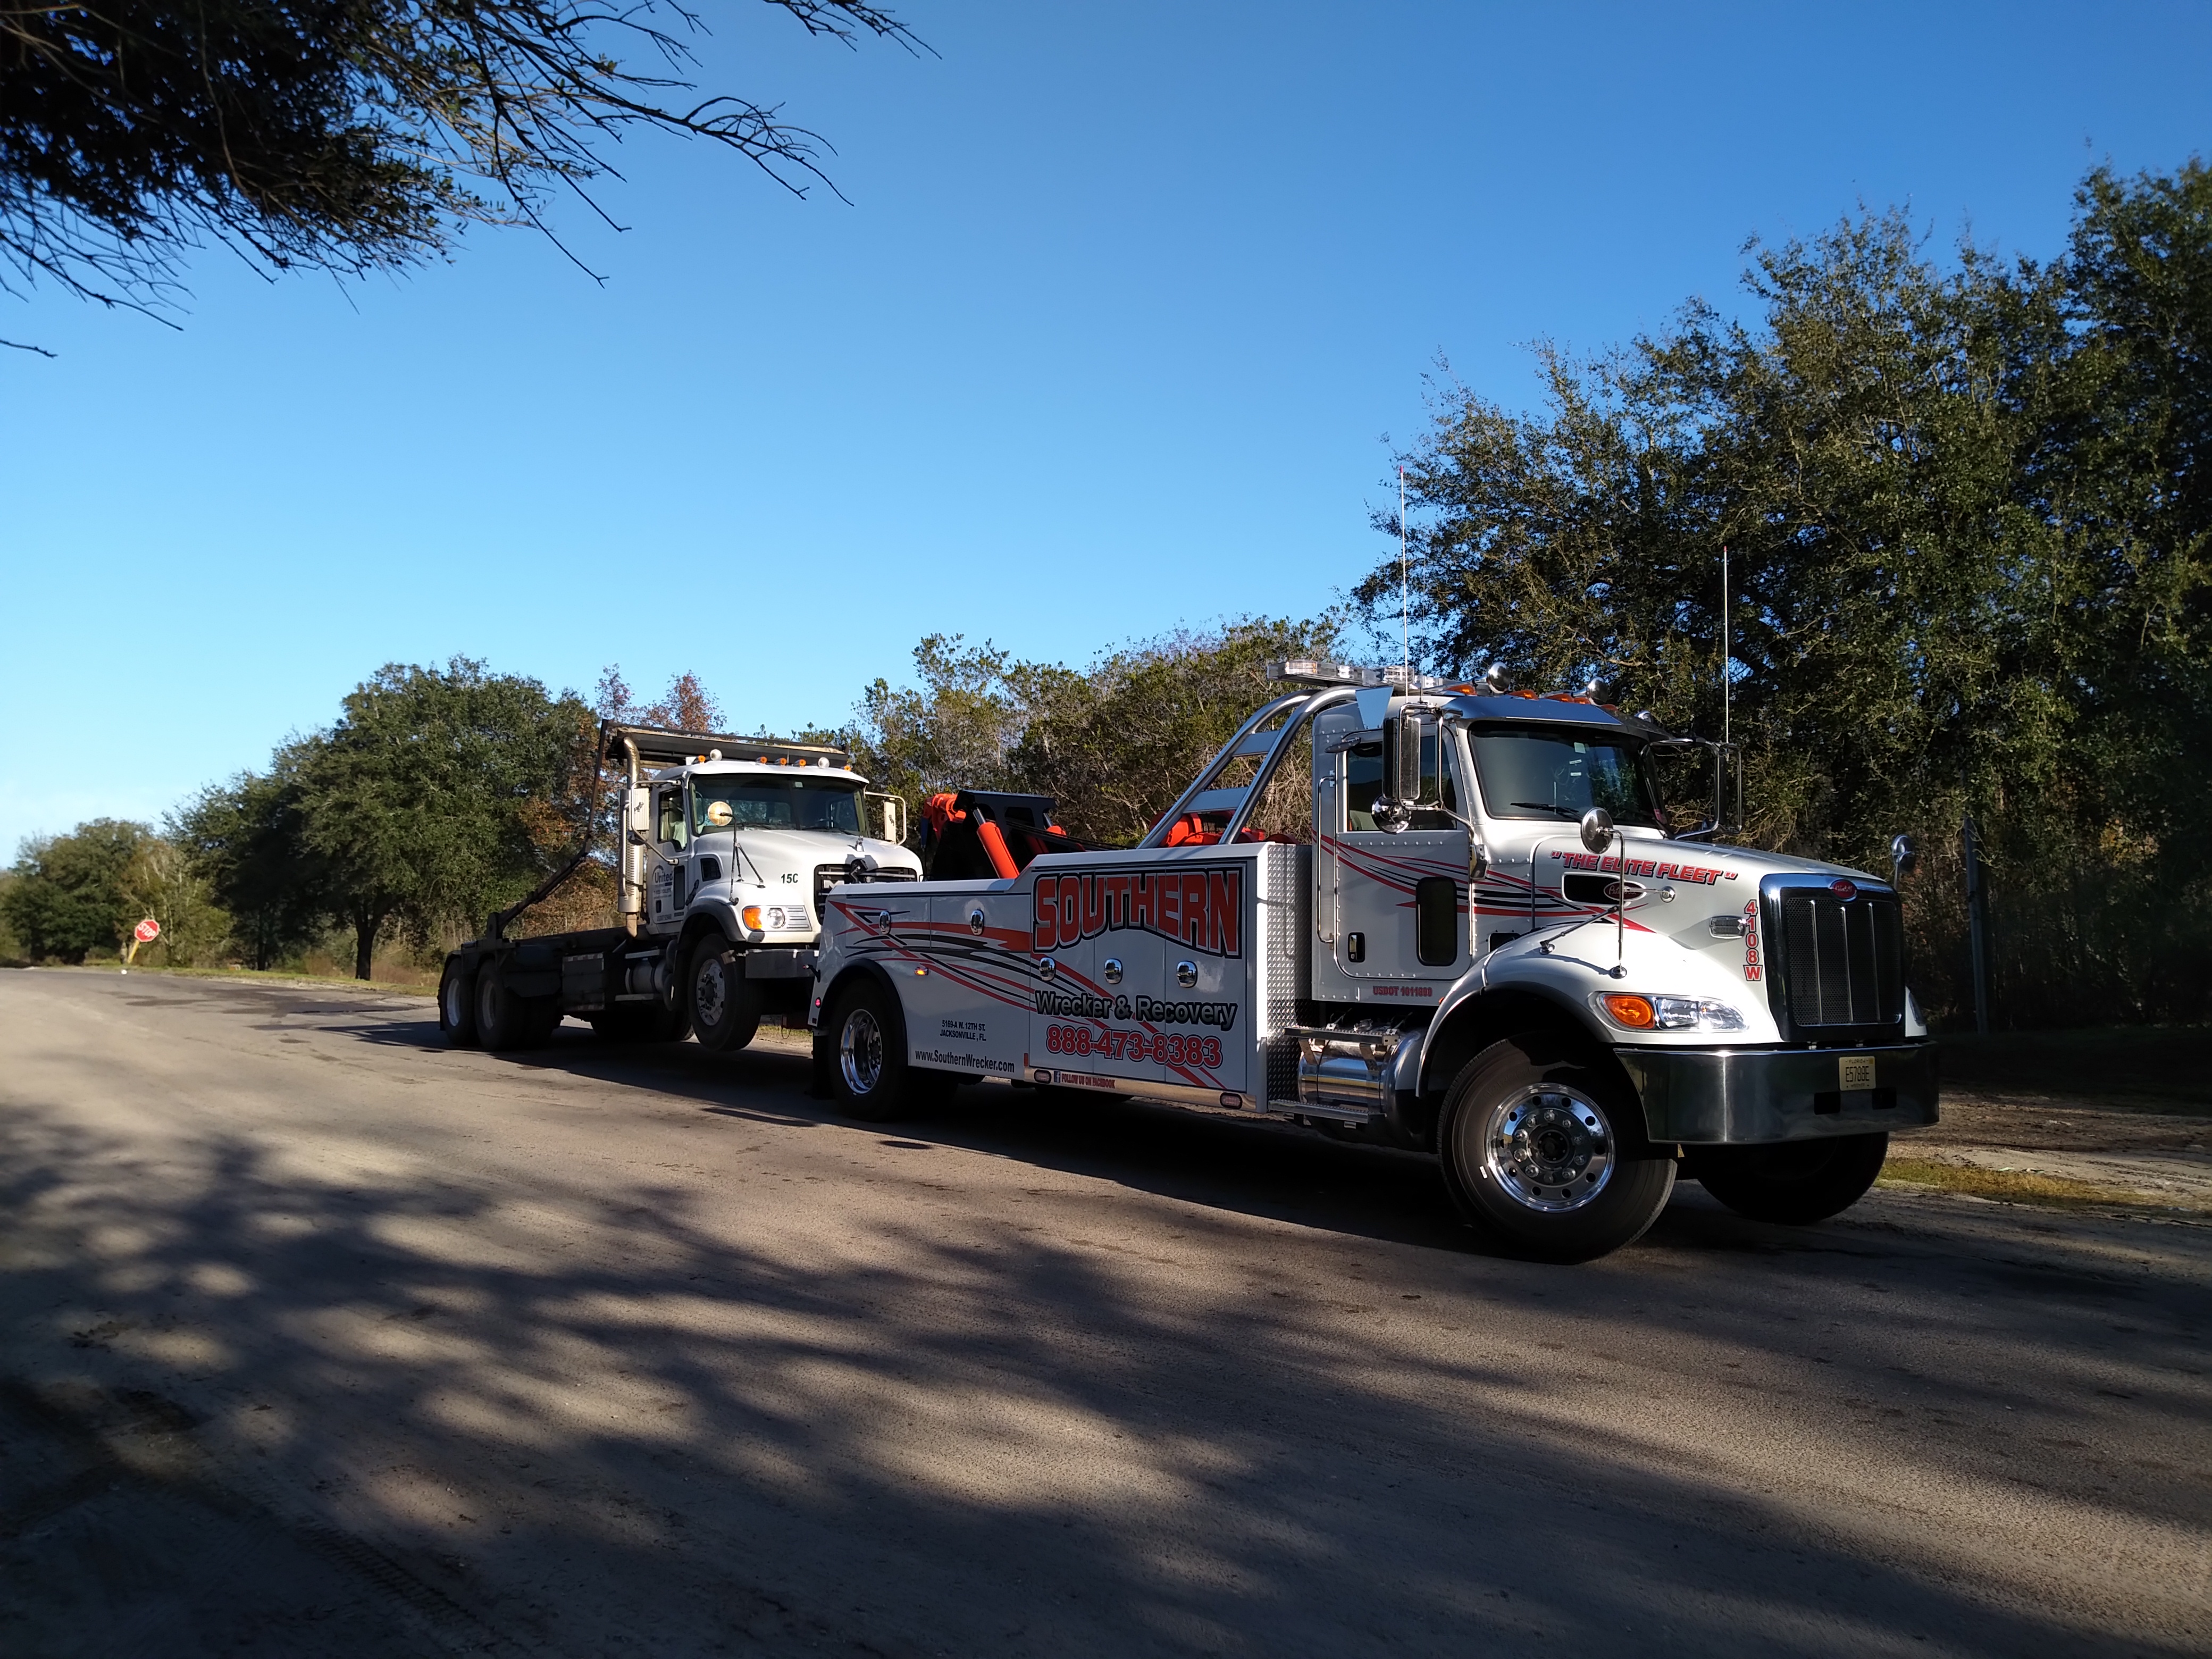 Southern Wrecker & Recovery has provided professional Light, Medium and Heavy duty towing to Jacksonville, St. Augustine and the surrounding area for over 15 years. Our team is customer-focused and fully certified to meet the highest expectations of our valued customers. We strive to provide the best service in the industry through our cutting edge equipment and distinguished operators. All of our towing and recovery services are available 24 hours a day, seven days a week.